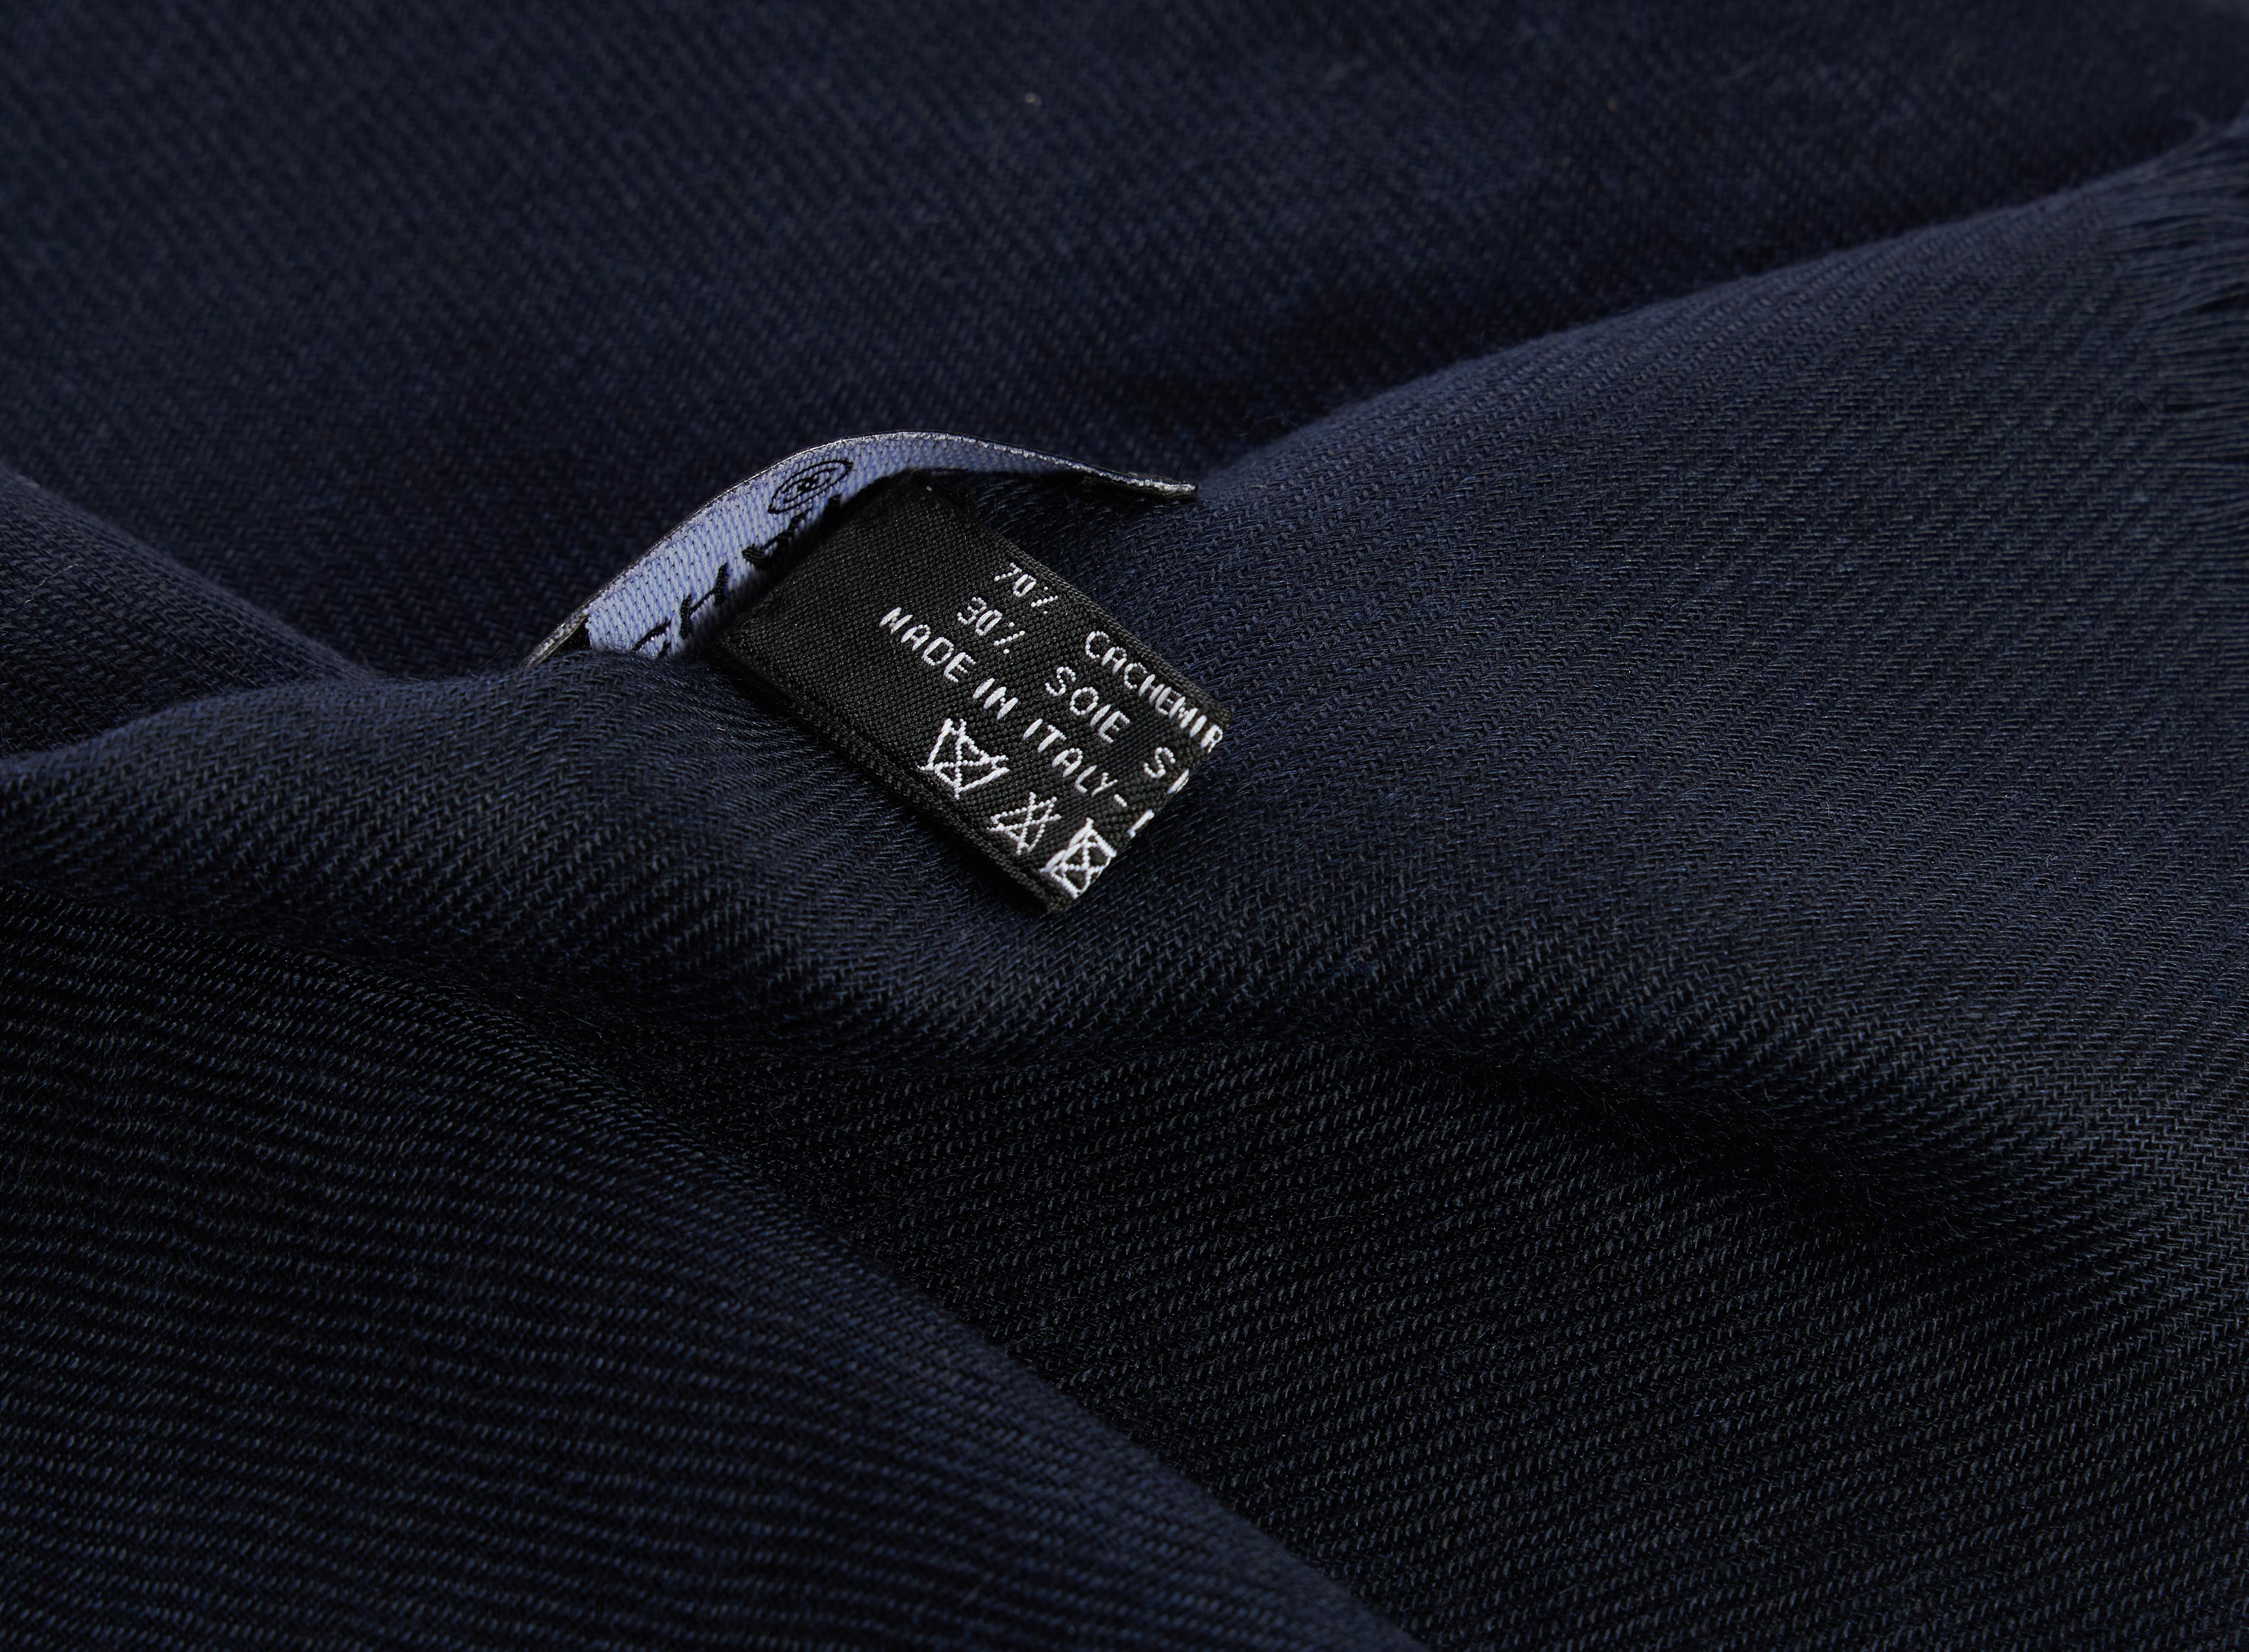 Chanel brand new navy blue cashmere shawl with cc embroidered logo. 70% cashmere, 30% silk. Comes with original care tag.